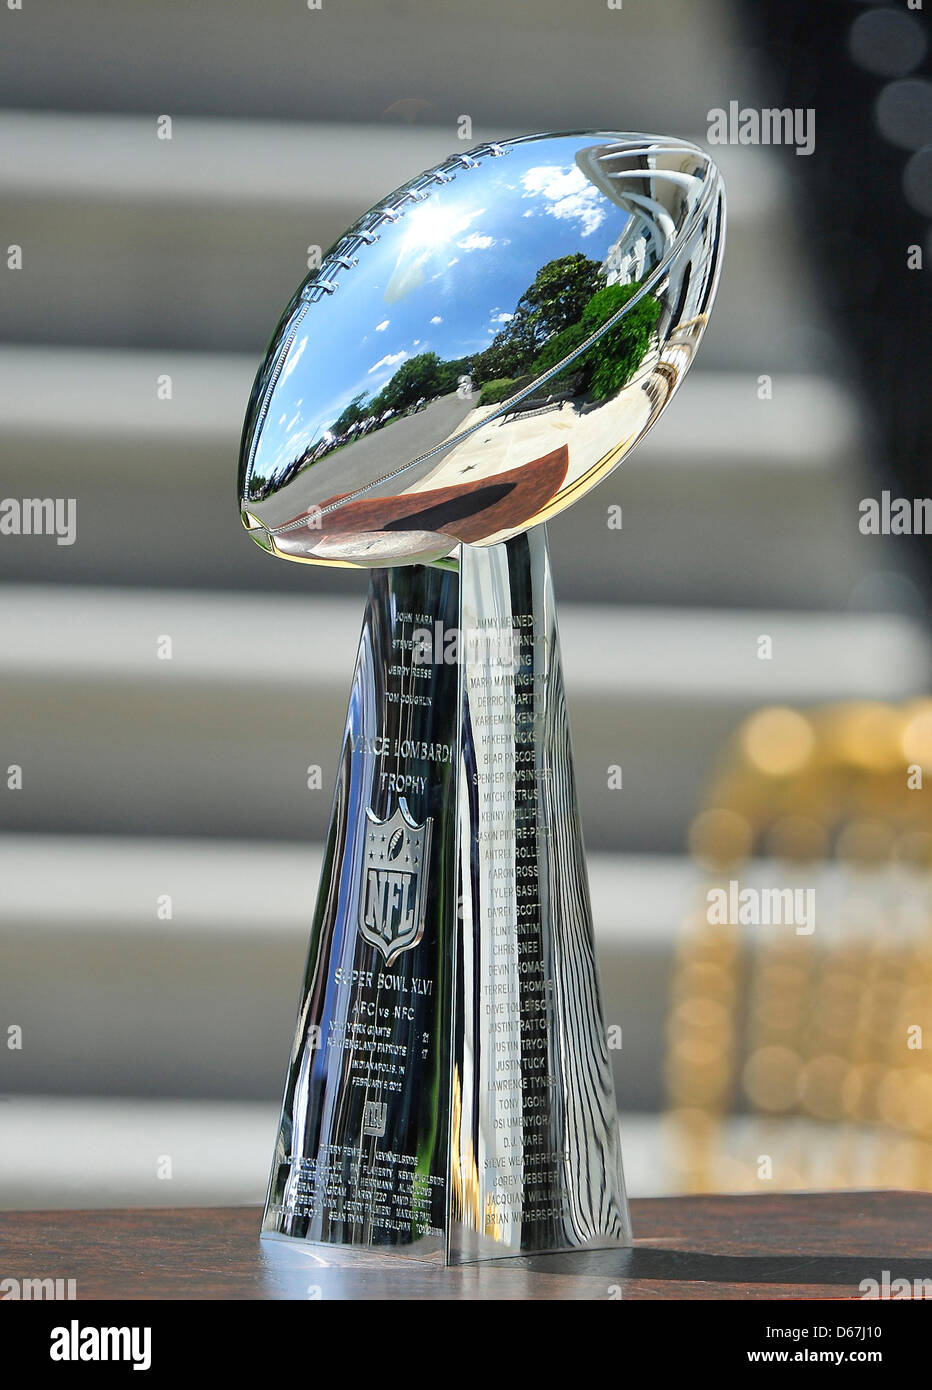 first vince lombardi trophy